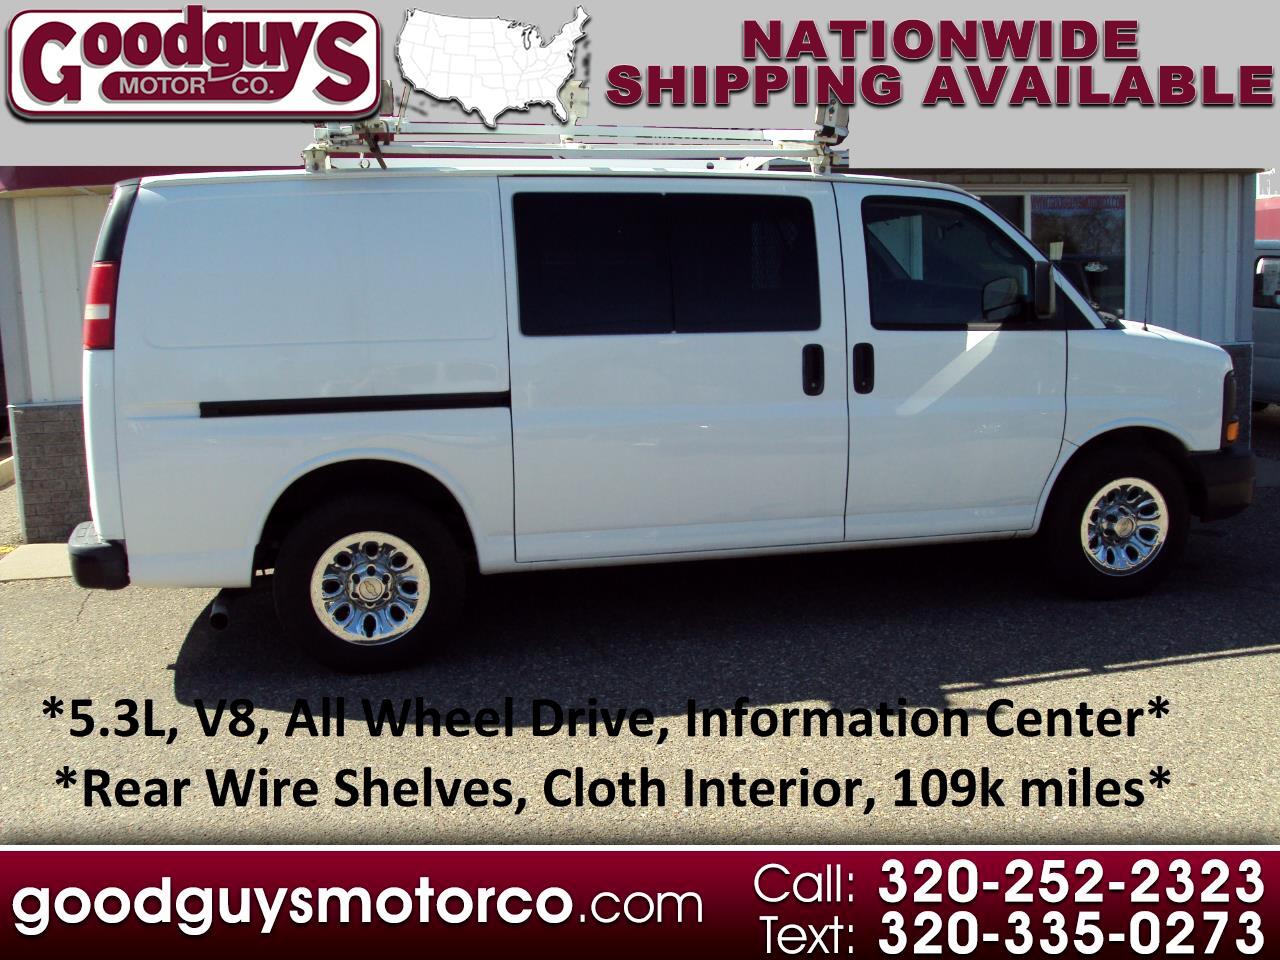 Used 2014 Chevrolet Express Cargo Van Awd 1500 135 For Sale In St Cloud Mn 56301 Goodguys Motor Co